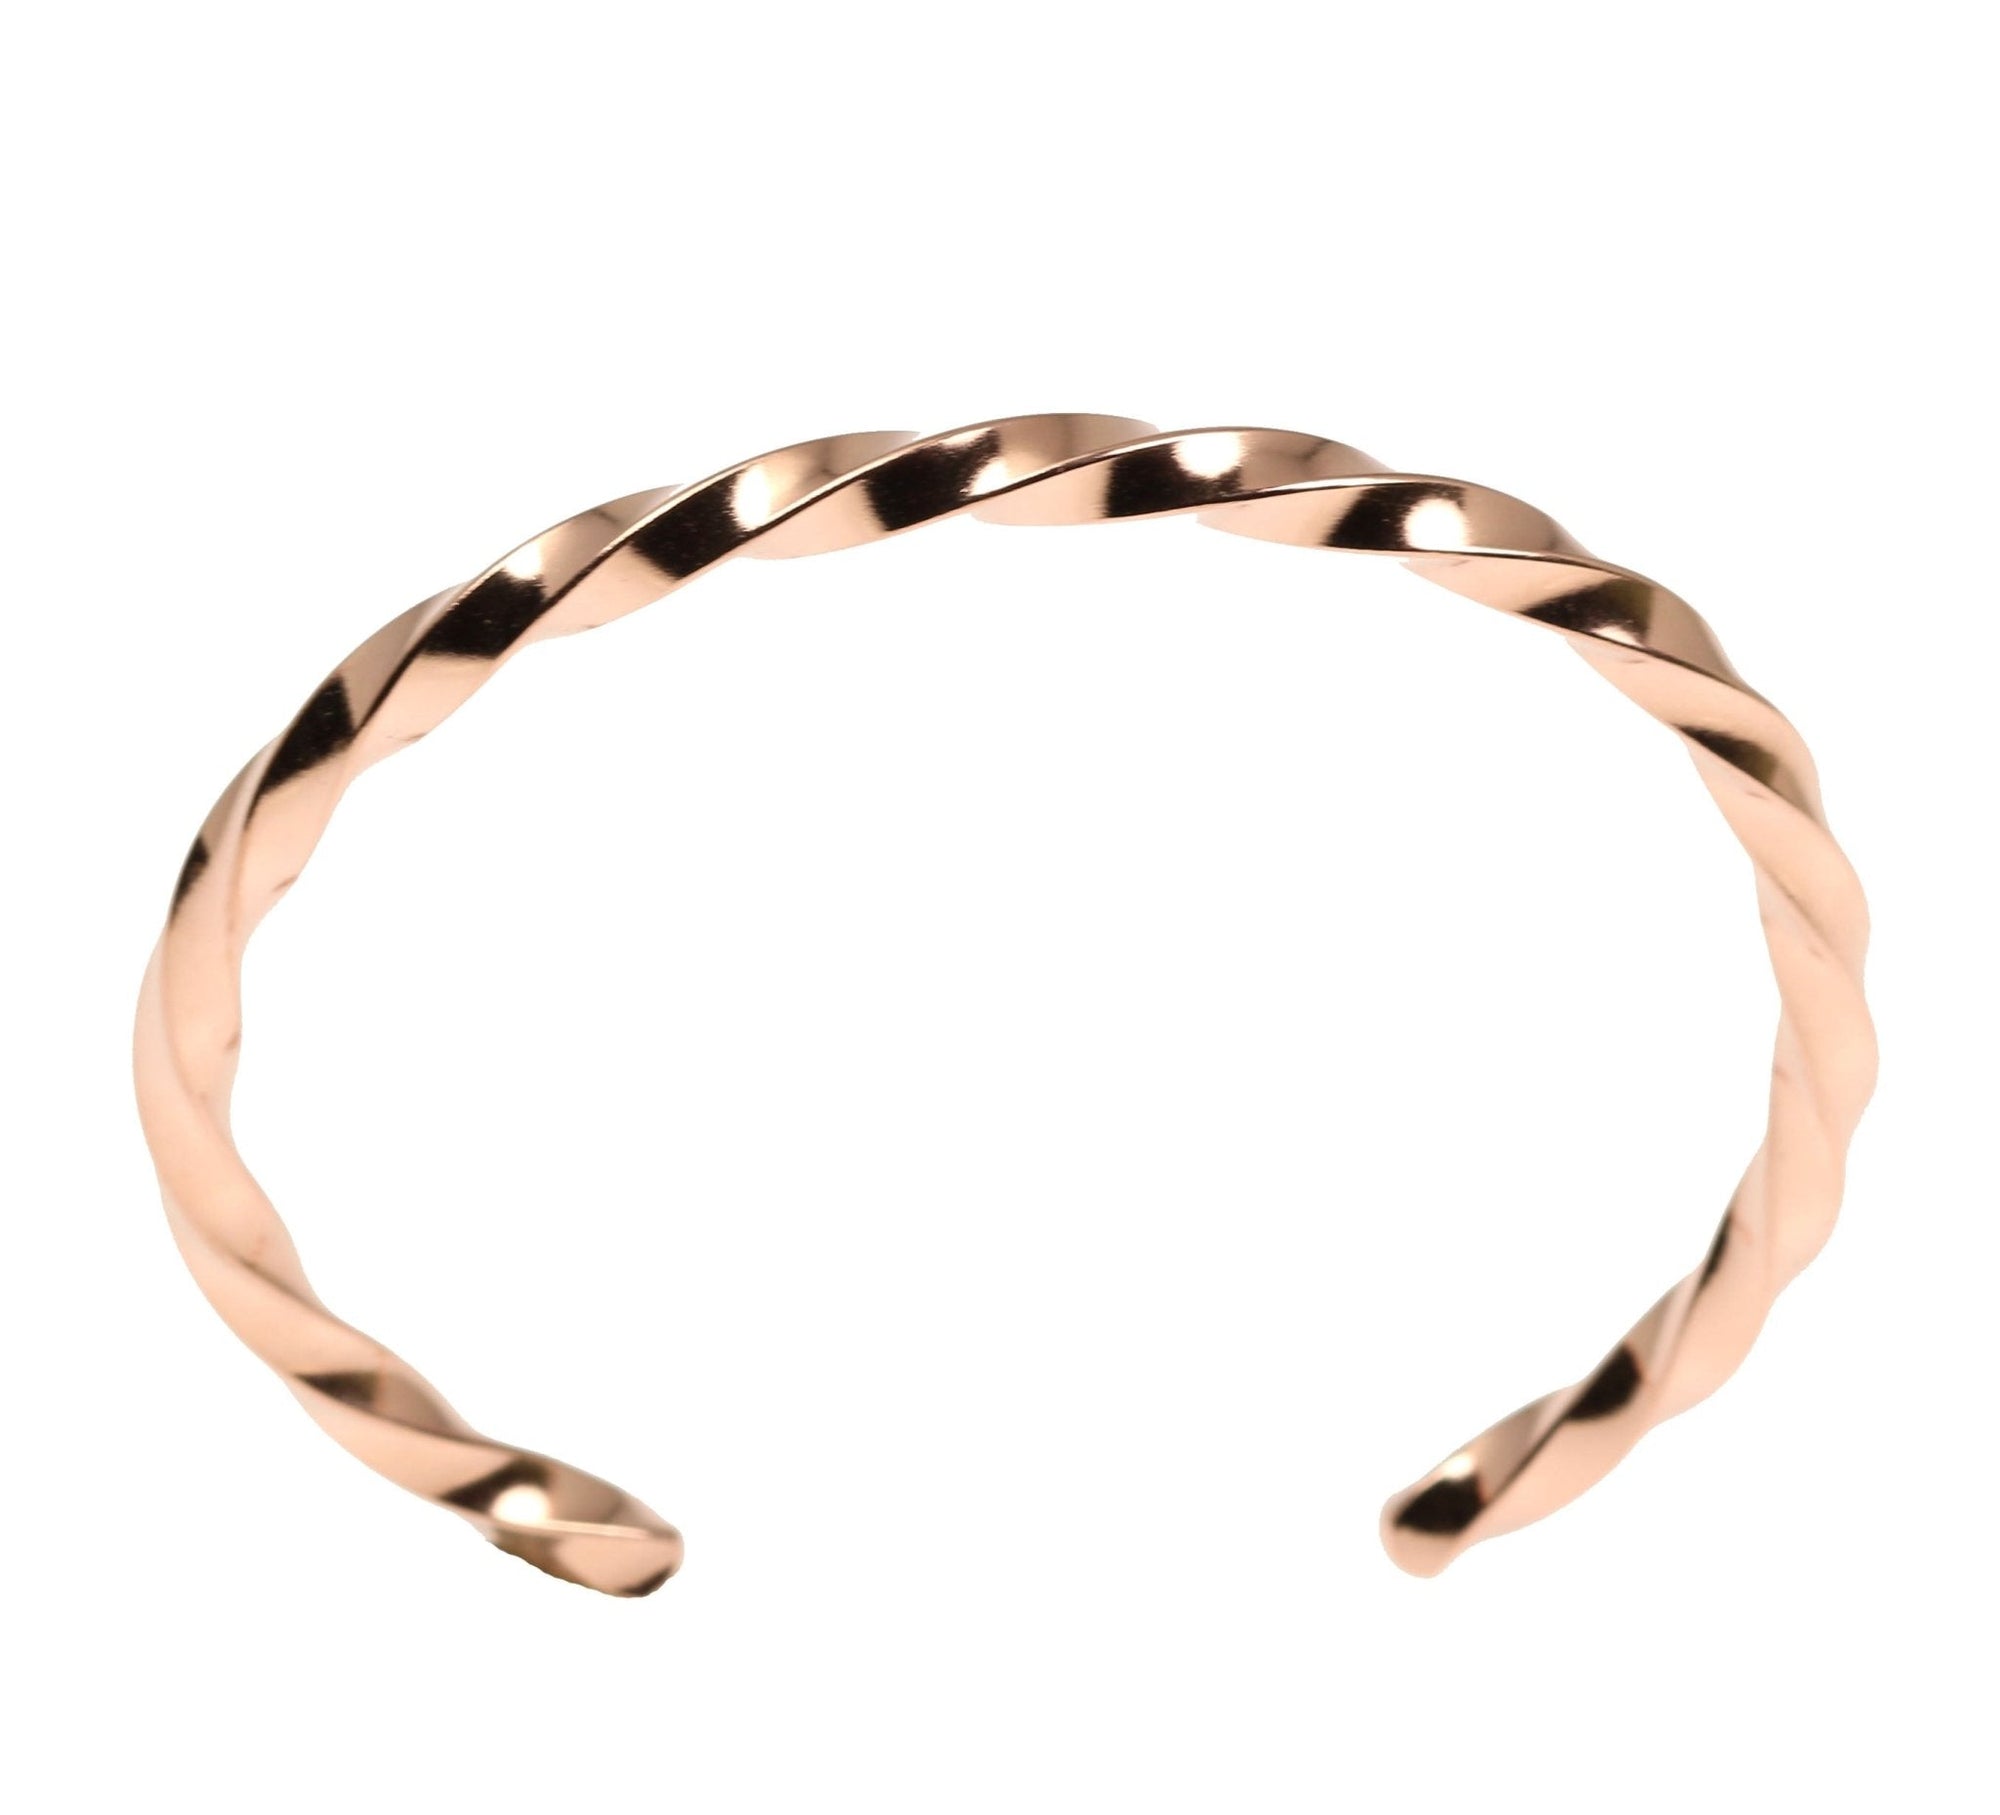 Top View of Twisted Copper Cuff Bracelet